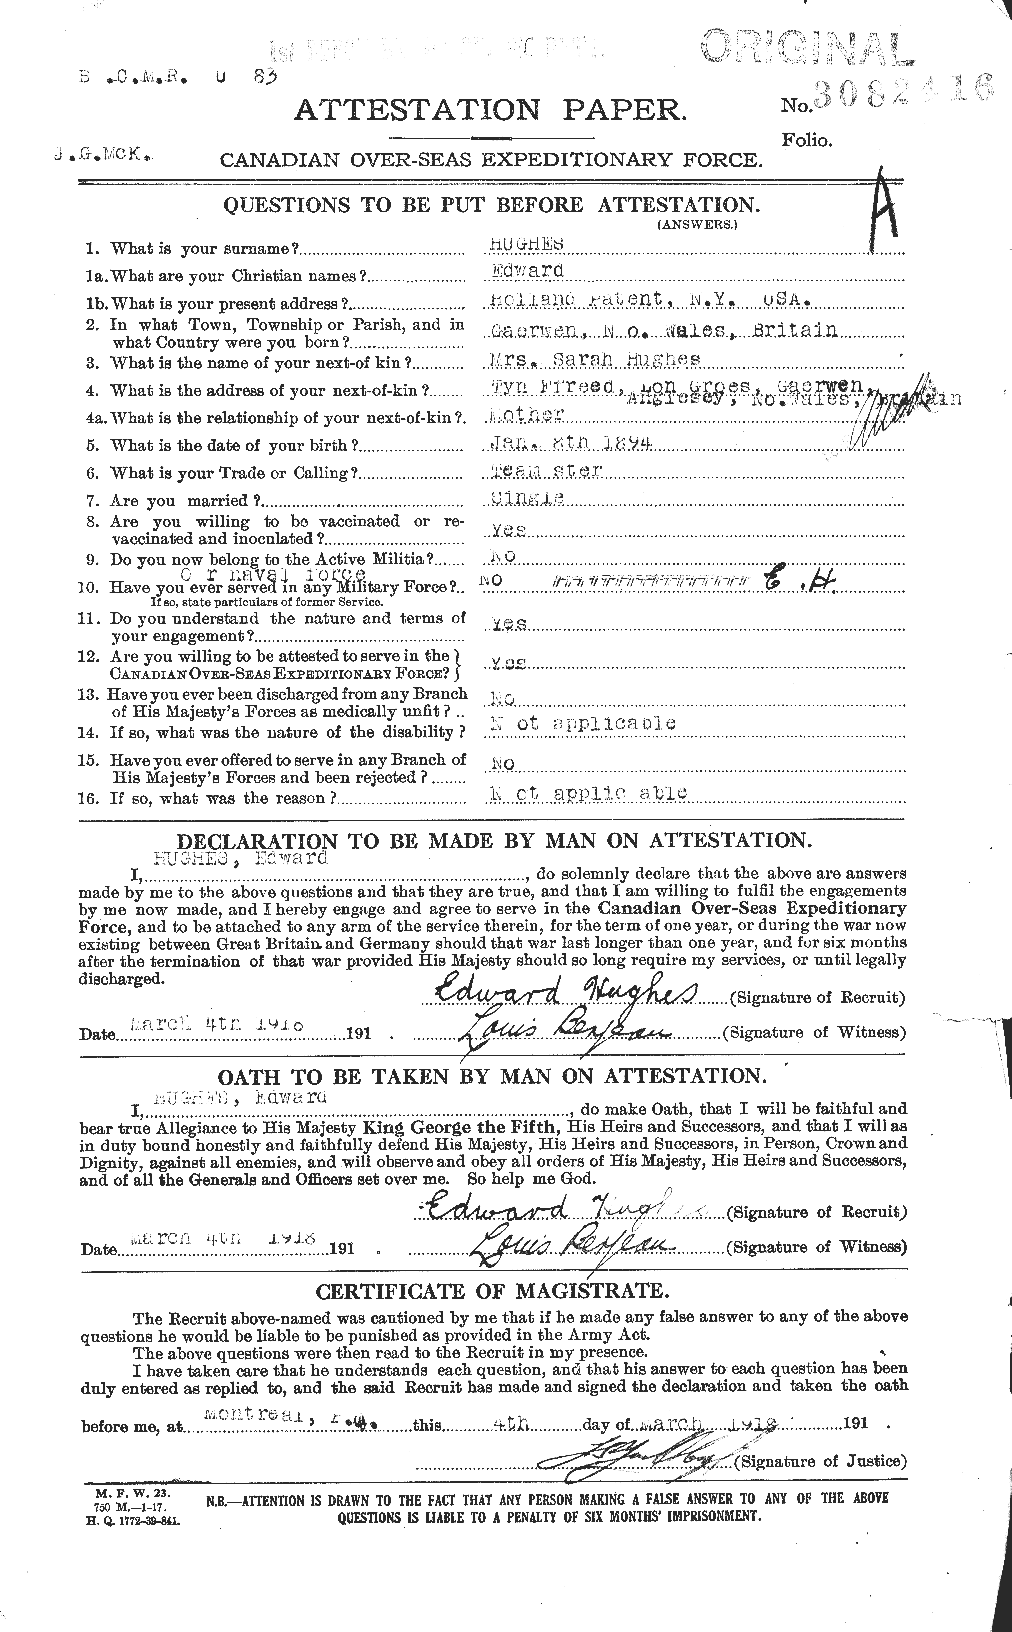 Personnel Records of the First World War - CEF 402674a